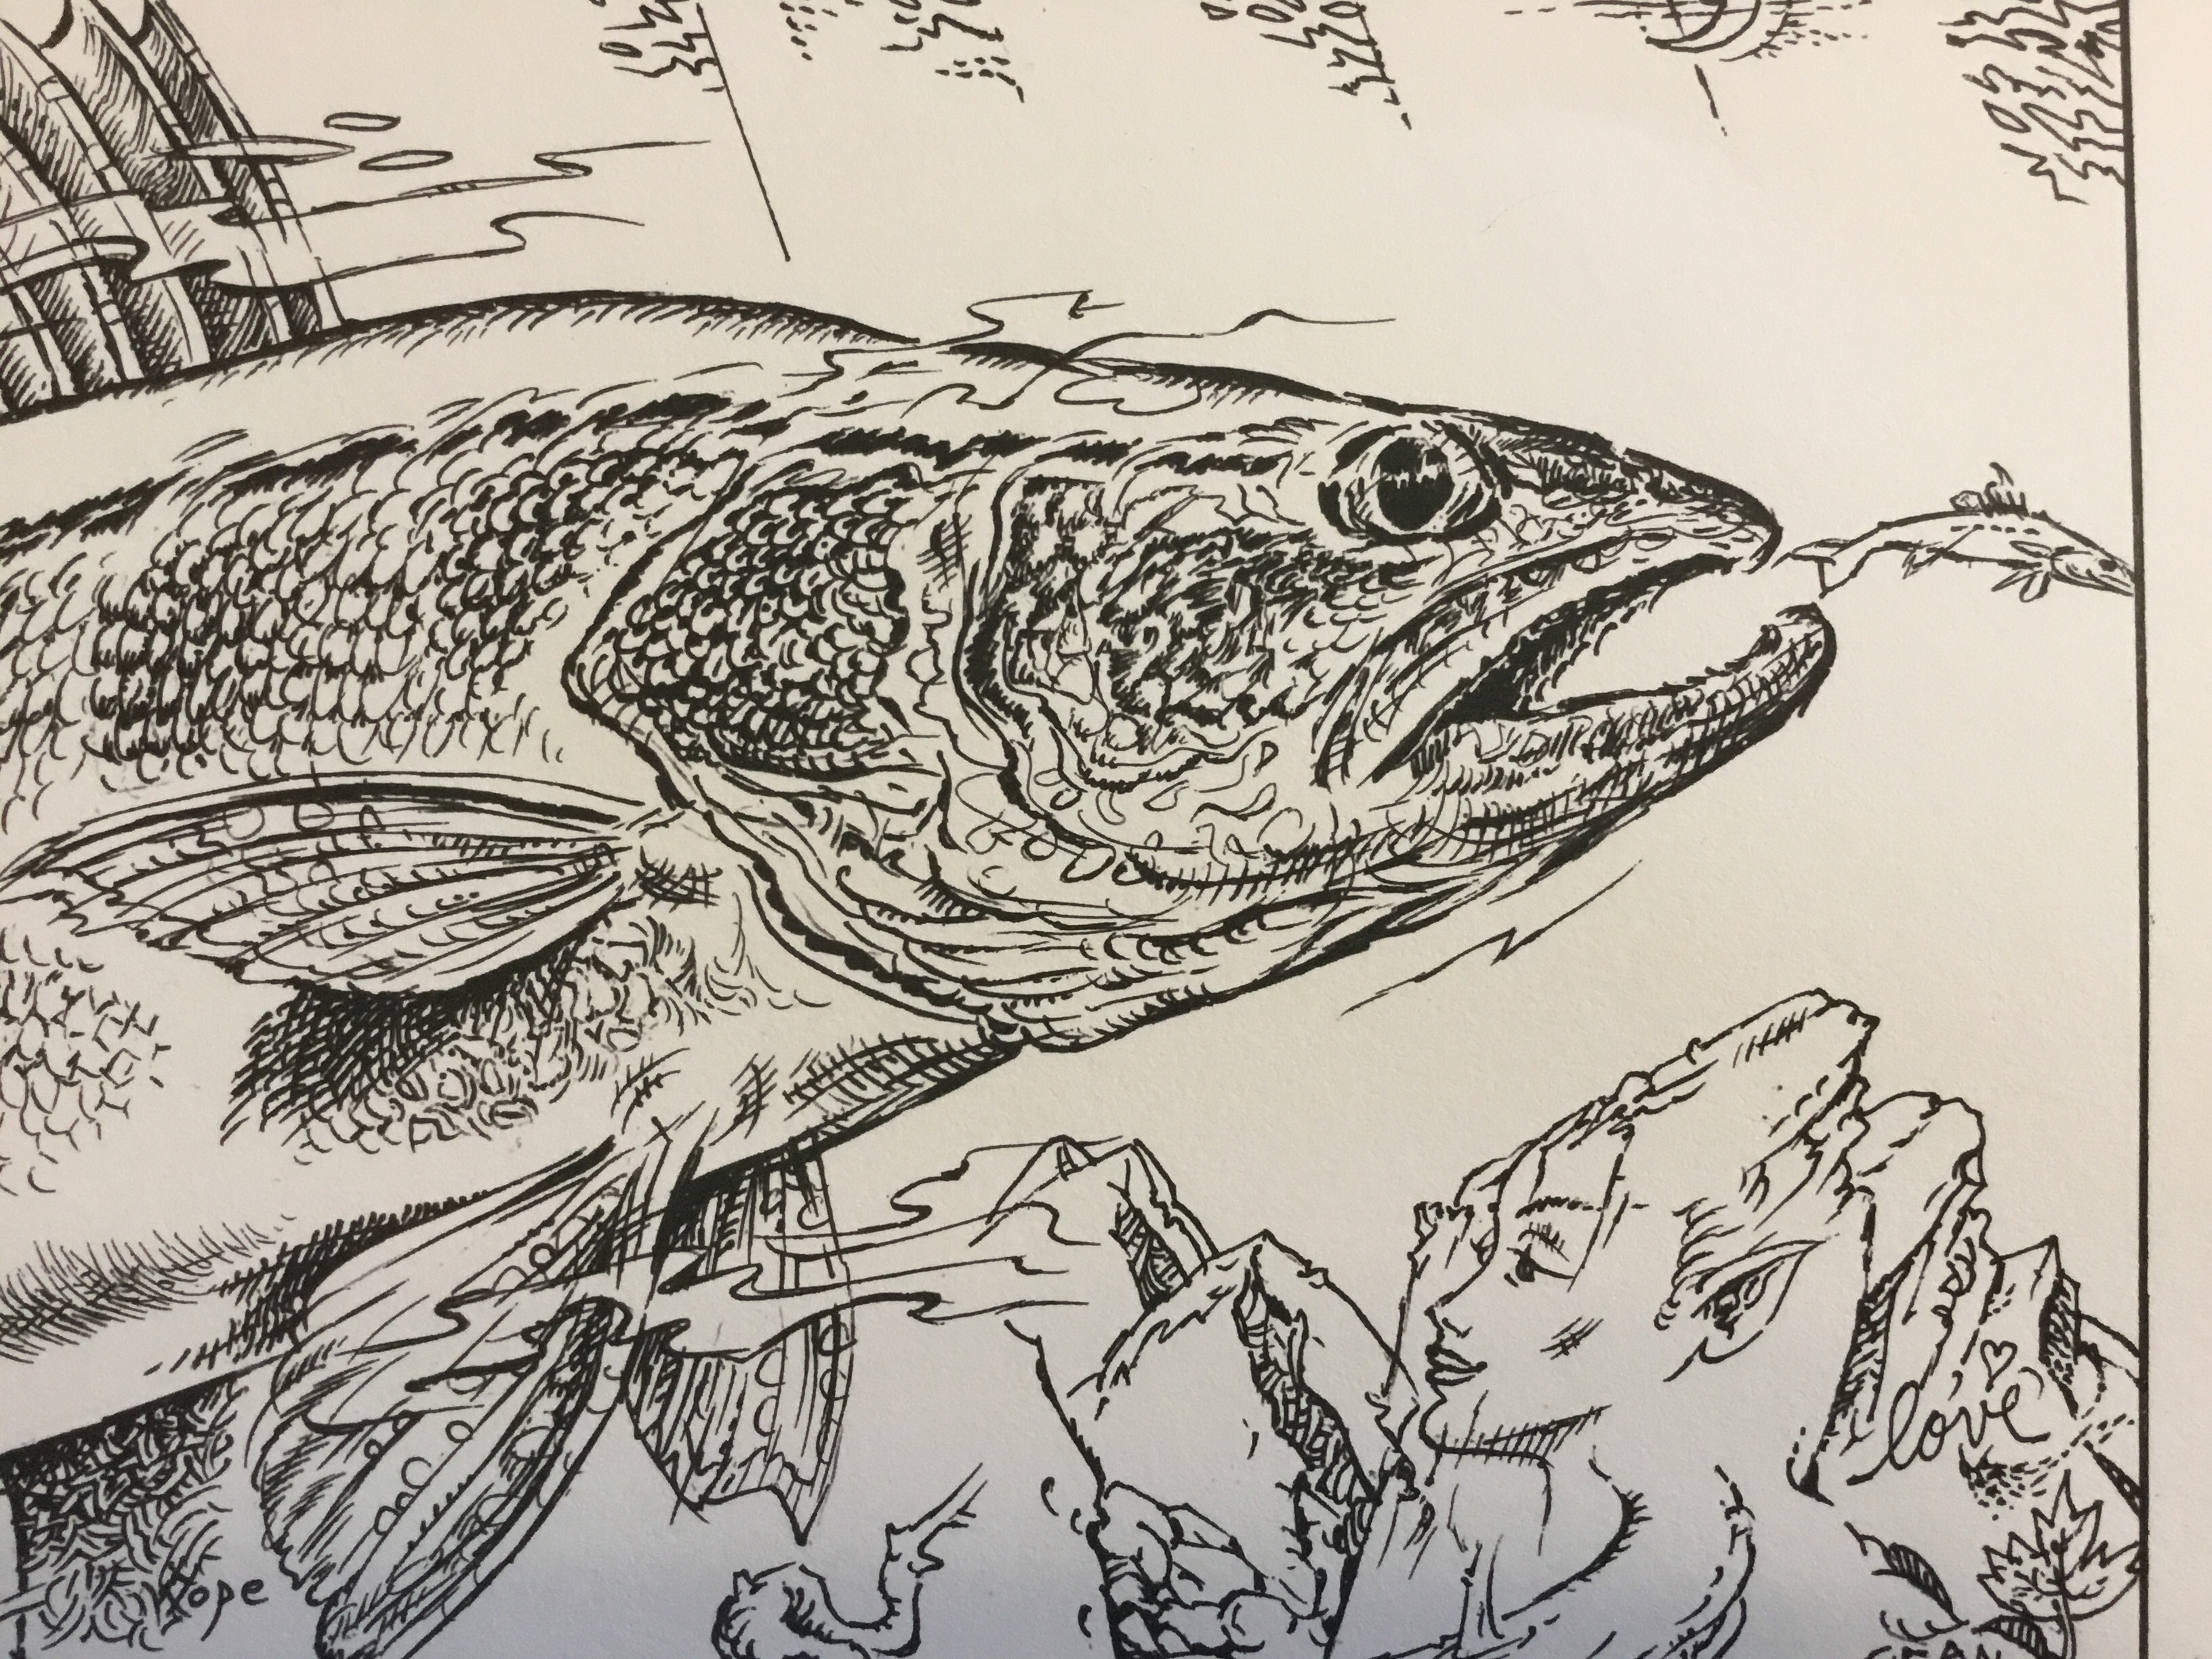 Walleye Drawing - Classifieds - Buy, Sell, Trade or Rent - Lake